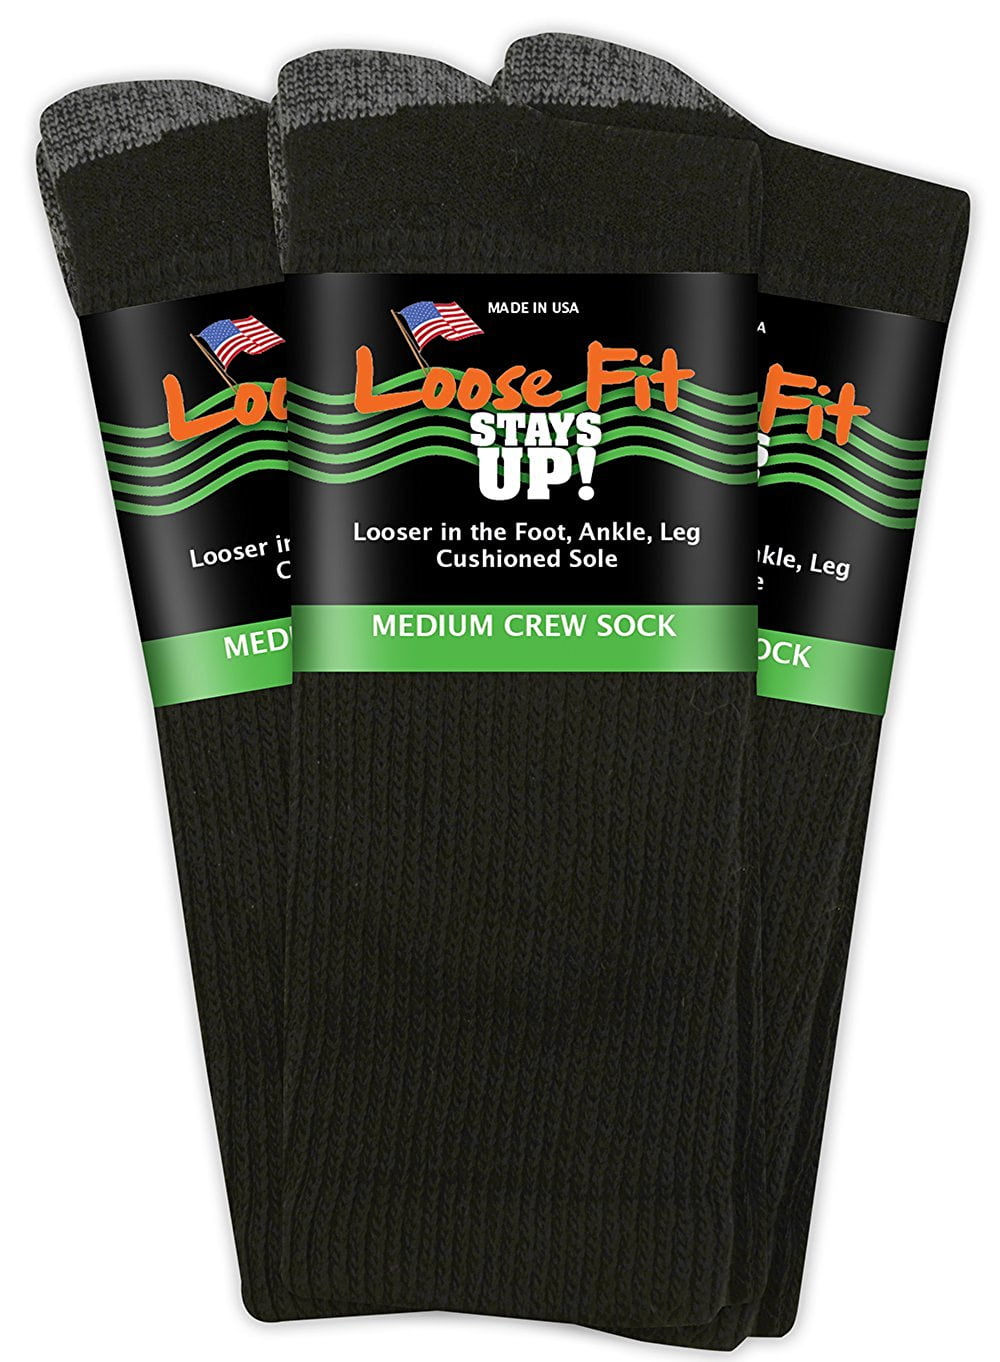 Loose Fit Stays Up Men's and Women's Low Cut Quarter Socks 3 Pack Made in USA! 